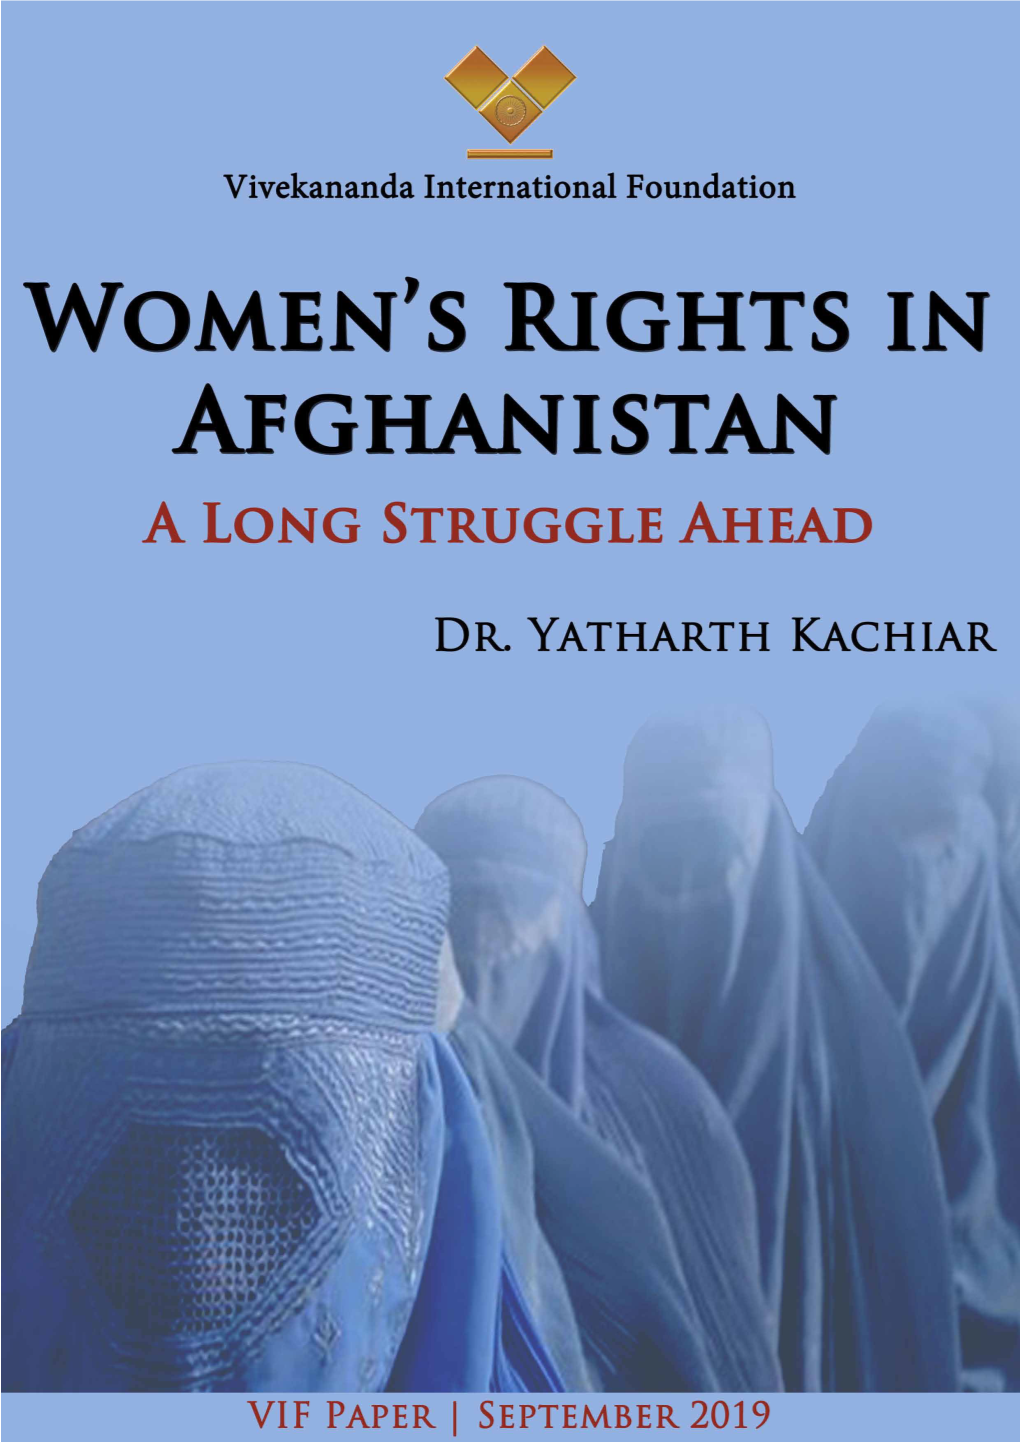 Women's Rights in Afghanistan